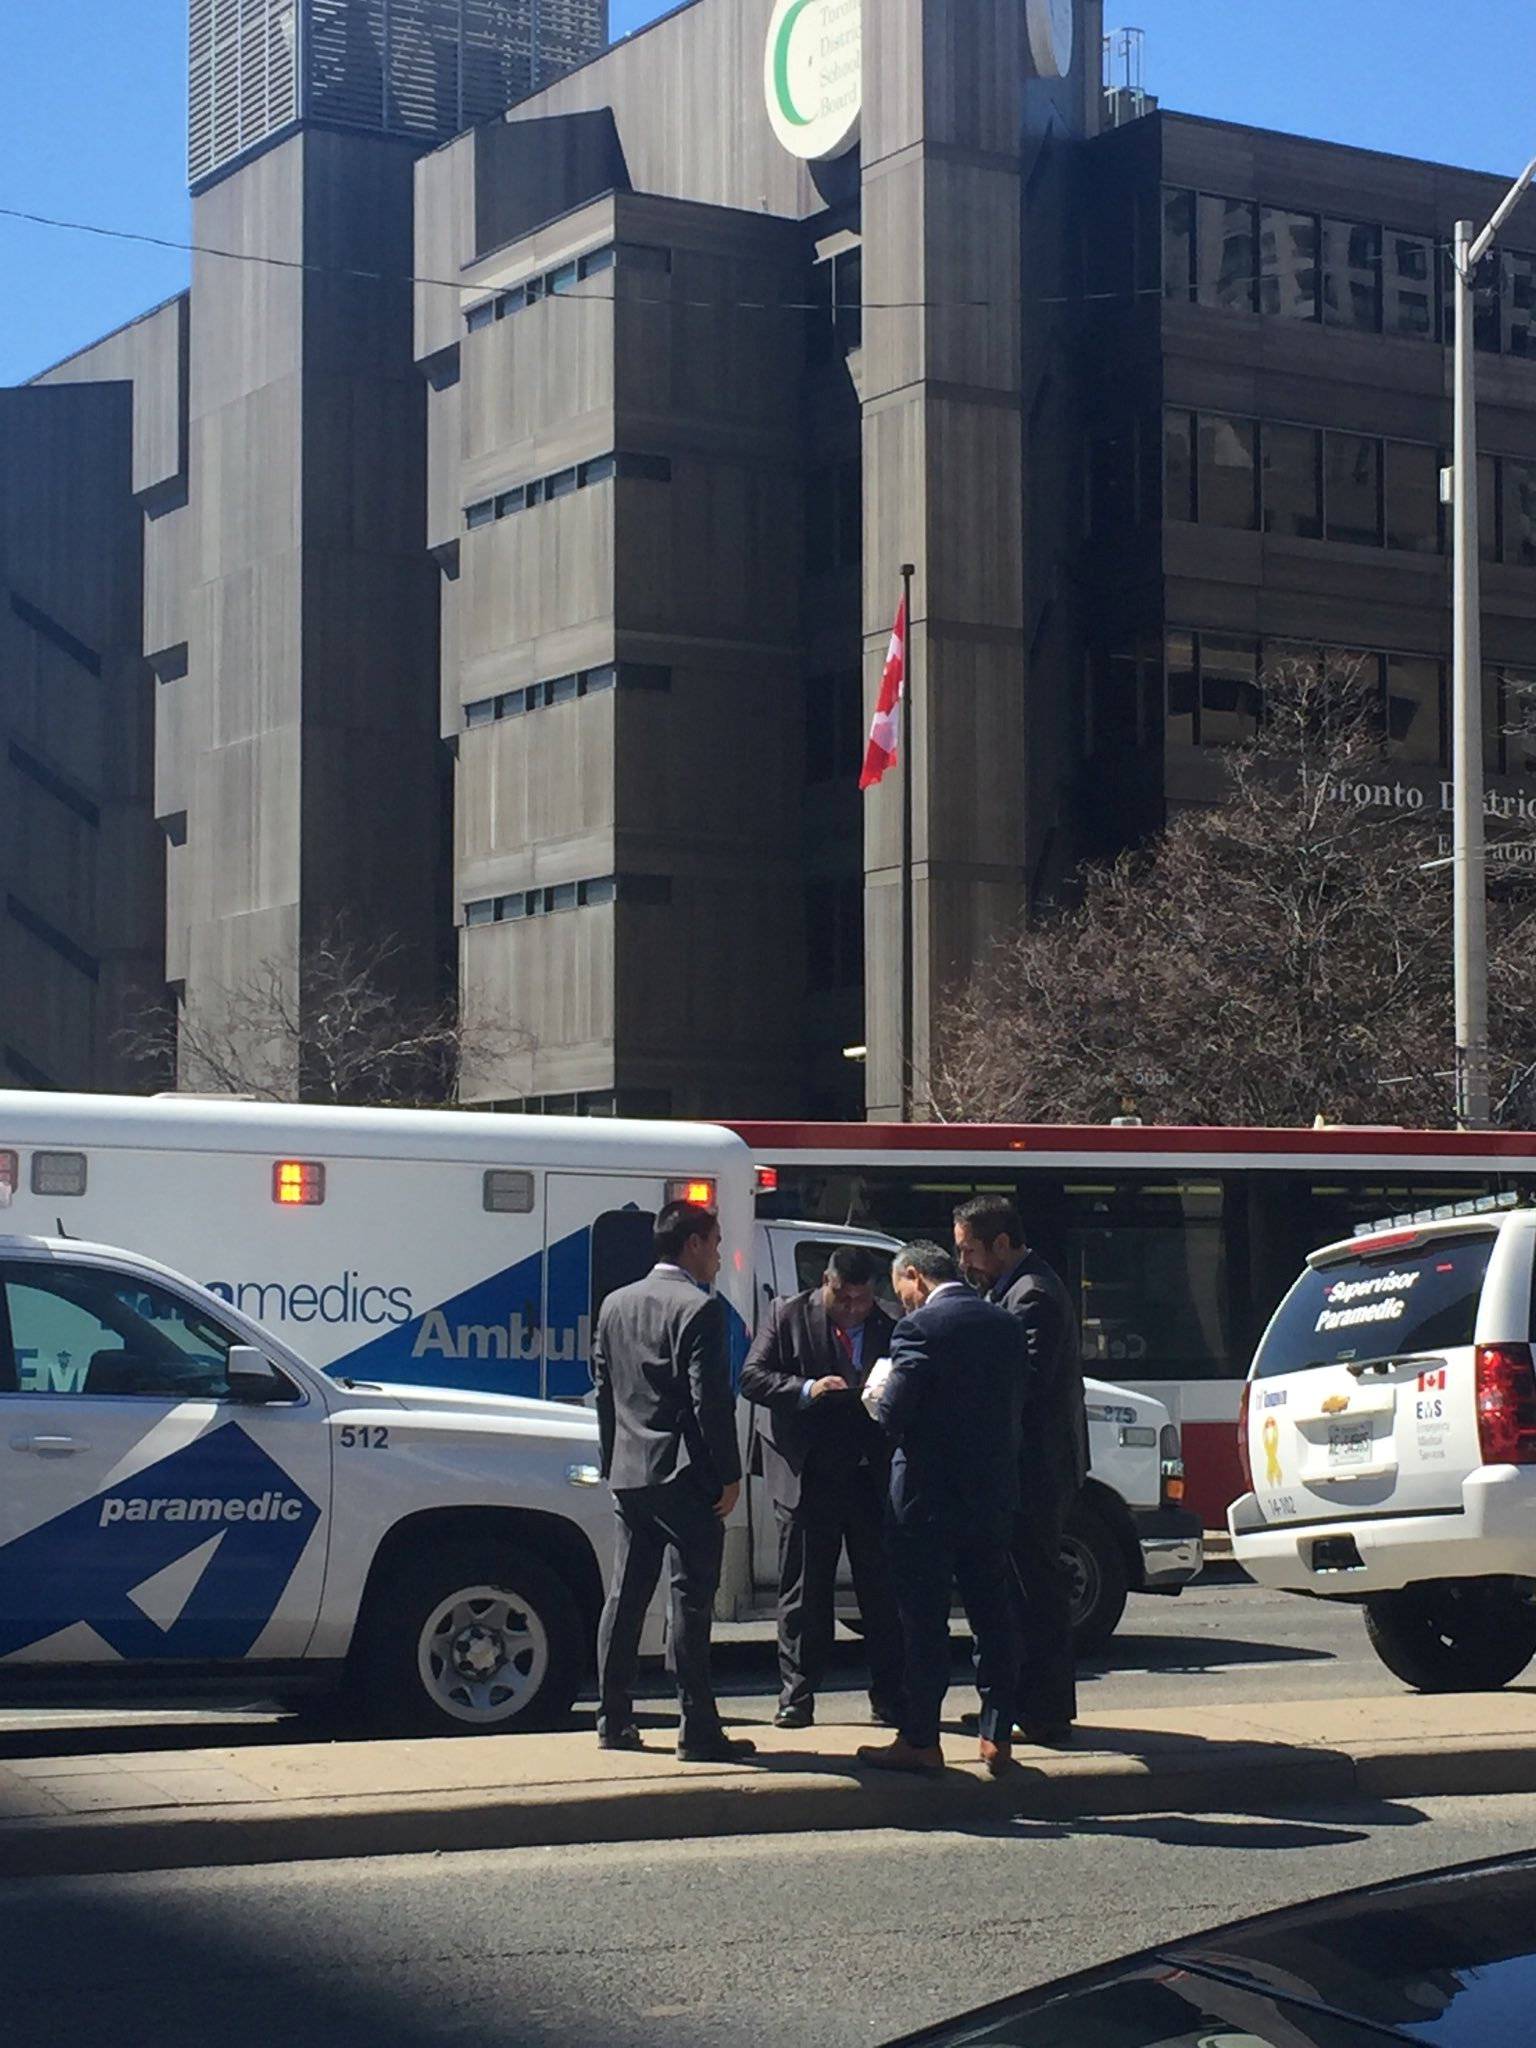 Detectives ask witnesses about an incident when a van hit multiple people at a major intersection in Toronto